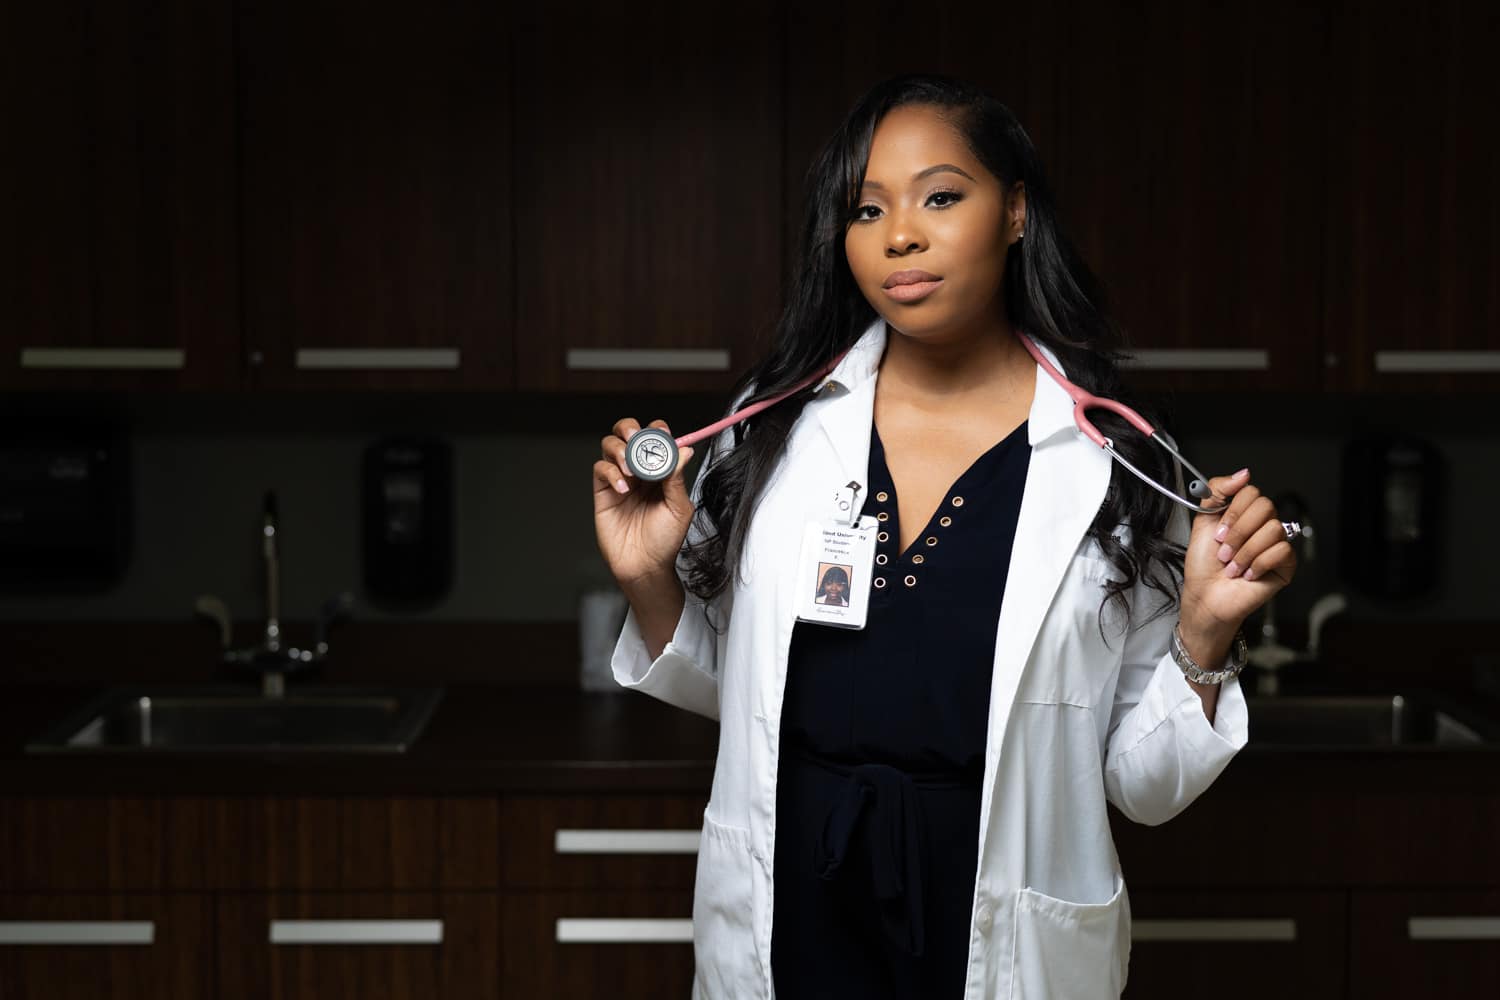  nurse practitioner in front of cabinets   